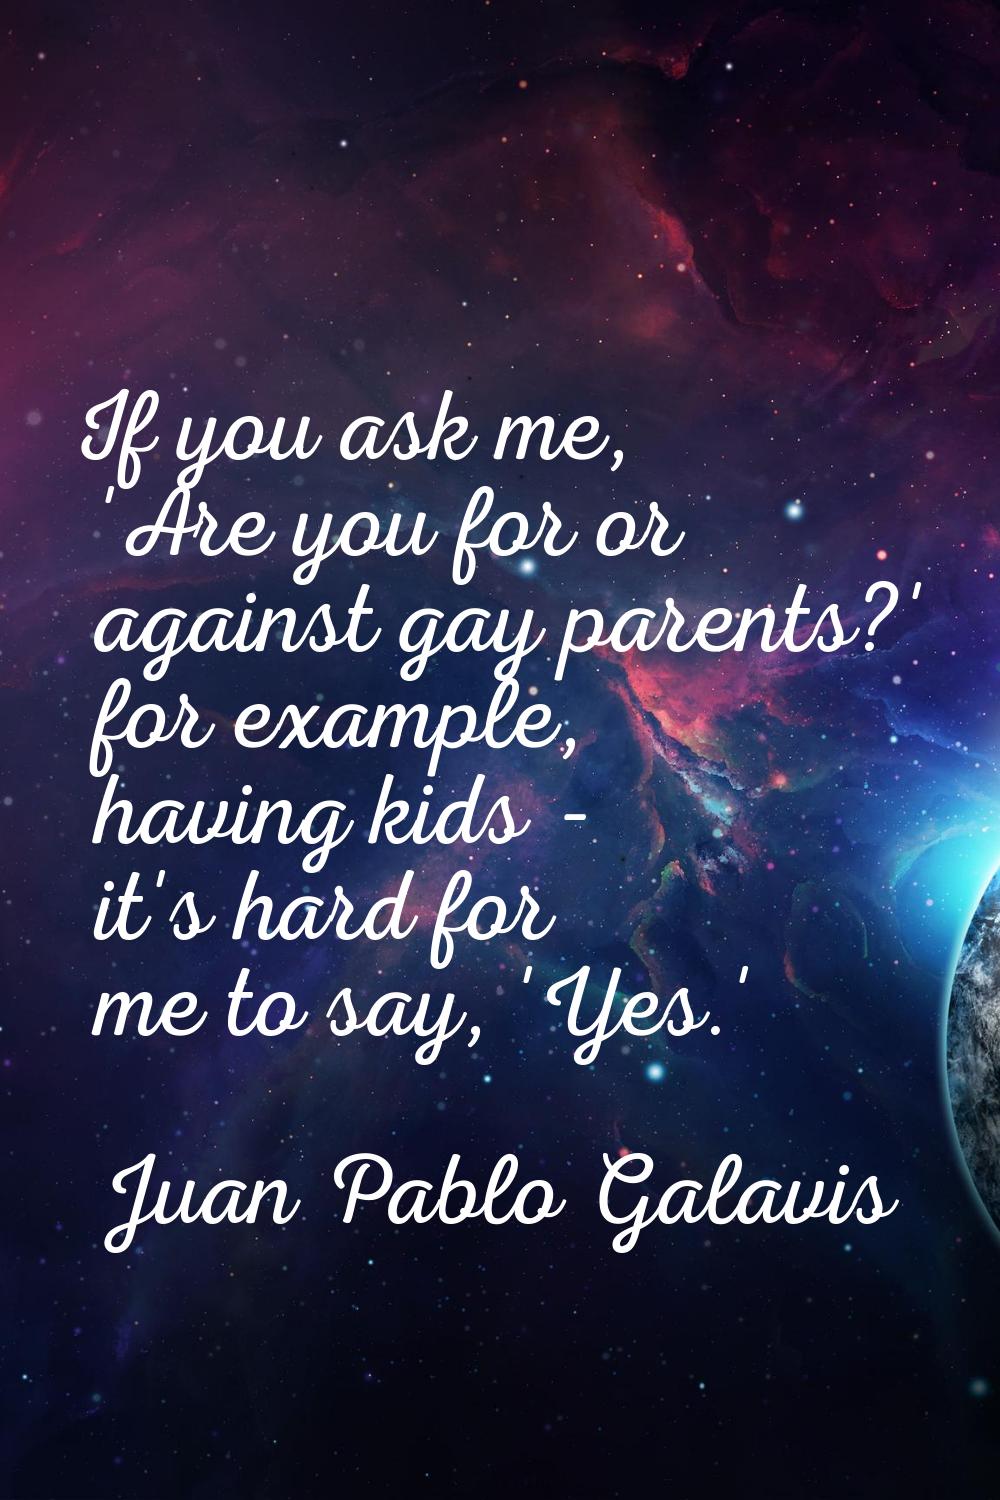 If you ask me, 'Are you for or against gay parents?' for example, having kids - it's hard for me to